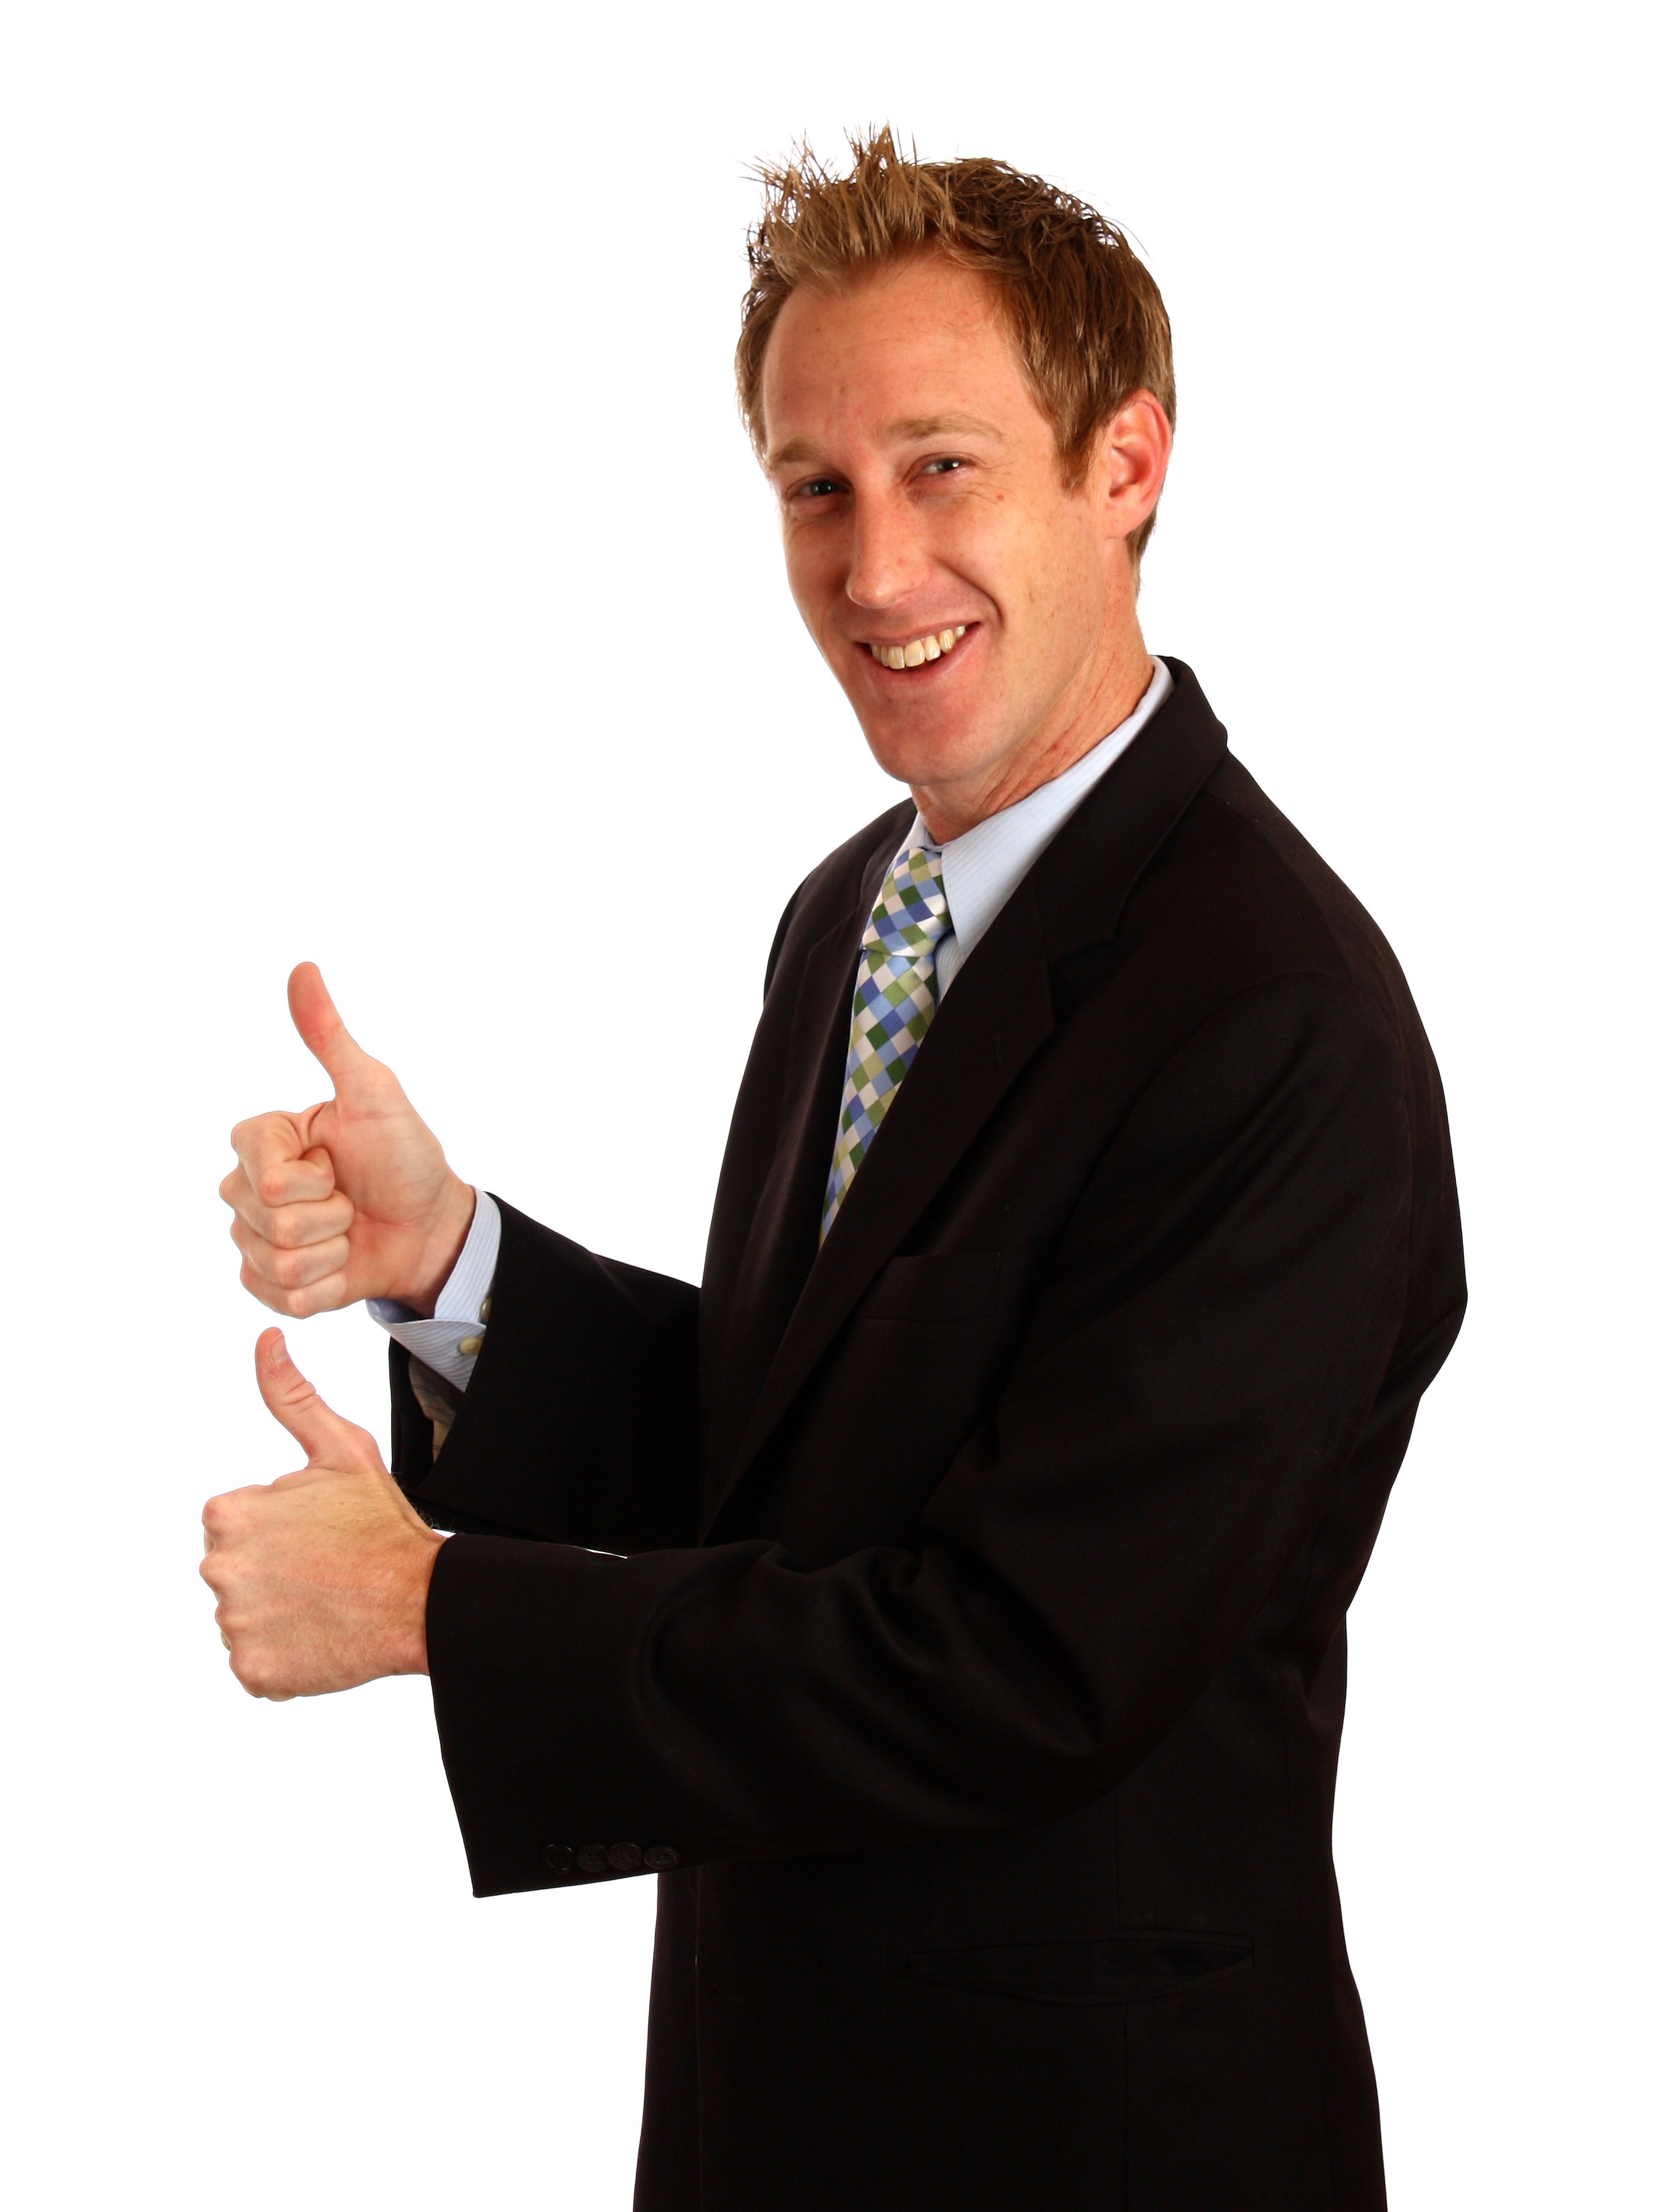 A young businessman giving a thumbs up, Bodyparts, Thumbsup, Thumbs, Symbols, HQ Photo